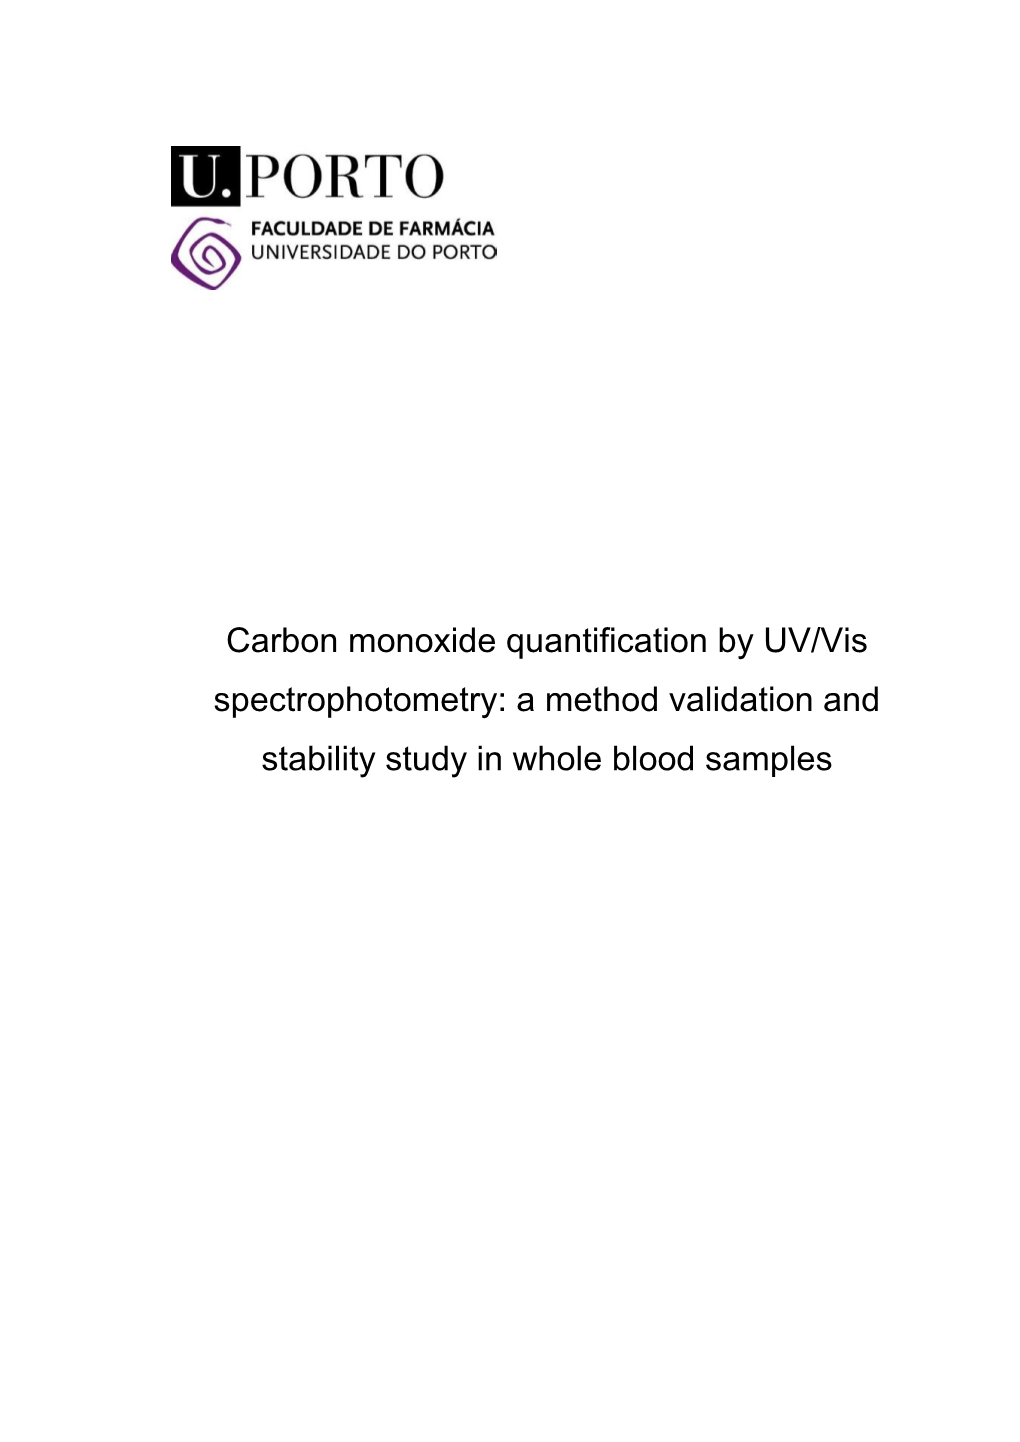 Carbon Monoxide Quantification by UV/Vis Spectrophotometry: a Method Validation and Stability Study in Whole Blood Samples